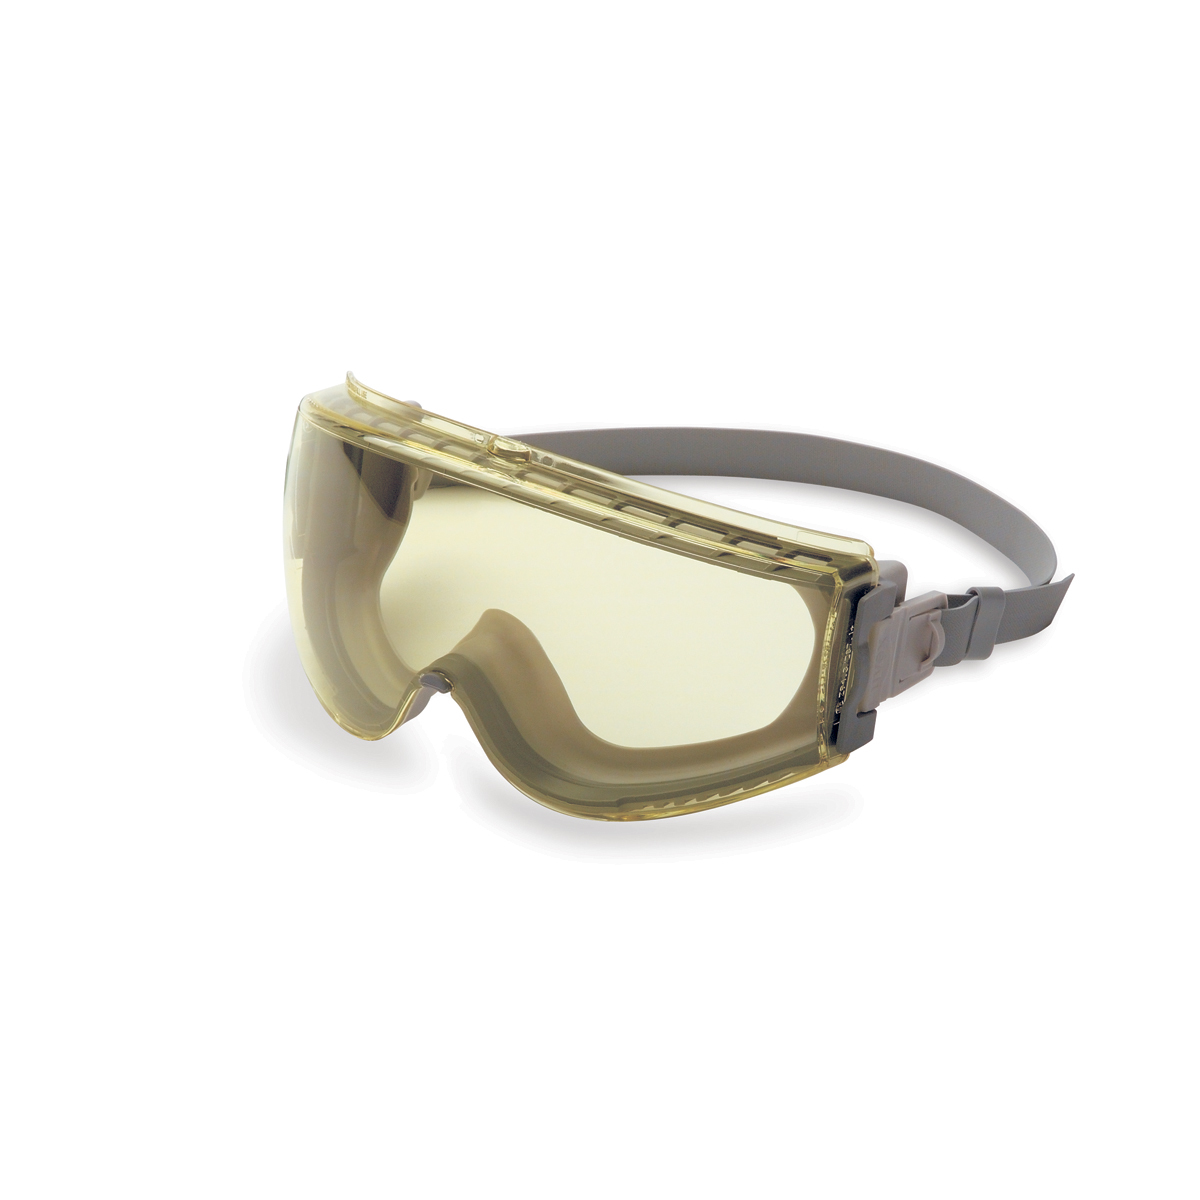 Honeywell Uvex Stealth® Indirect Vent Chemical Splash Impact Goggles With Gray Low Profile Frame And Amber HydroShield® Anti-Fog